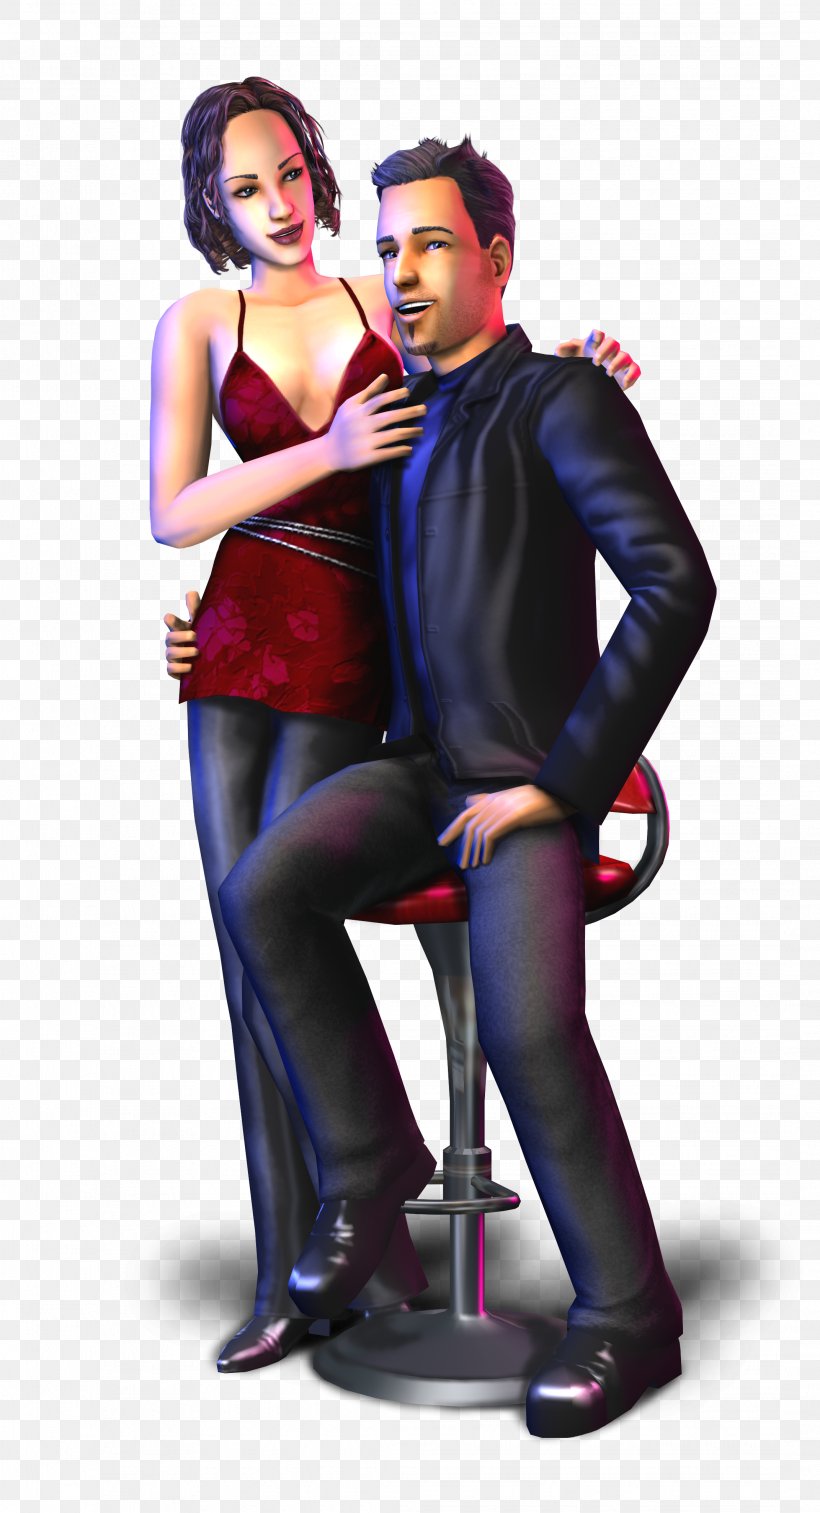 The Sims 2: Nightlife The Sims: Hot Date The Sims 3 The Sims 4 The Sims 2: Pets, PNG, 2142x3954px, Sims 2 Nightlife, Expansion Pack, Fictional Character, Game, Life Simulation Game Download Free